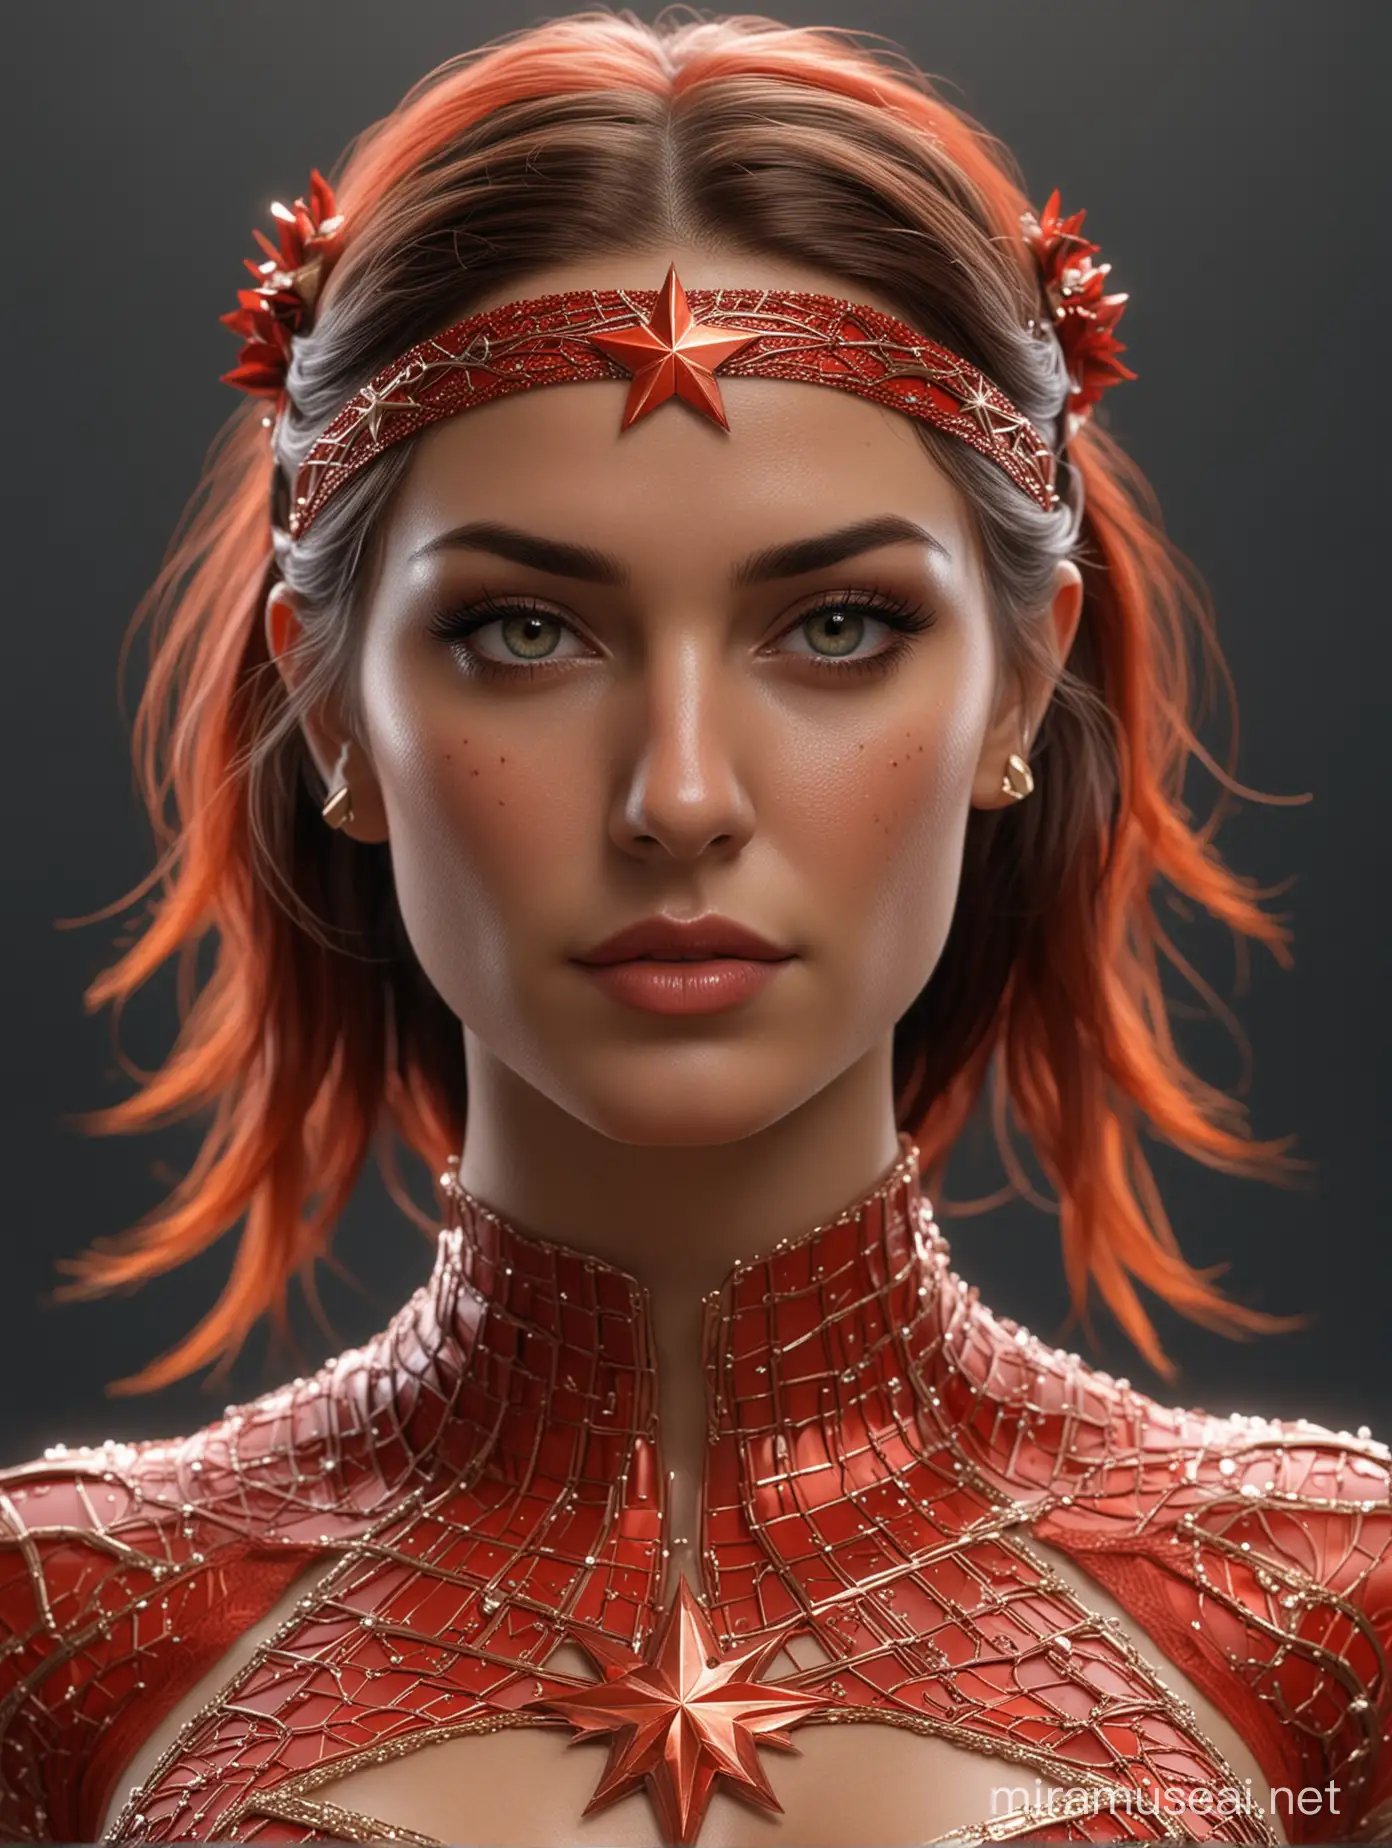 Photorealistic Ultra Realism of a Beautiful Fractal Amazon Superhero in Red and Copper with Star Headband